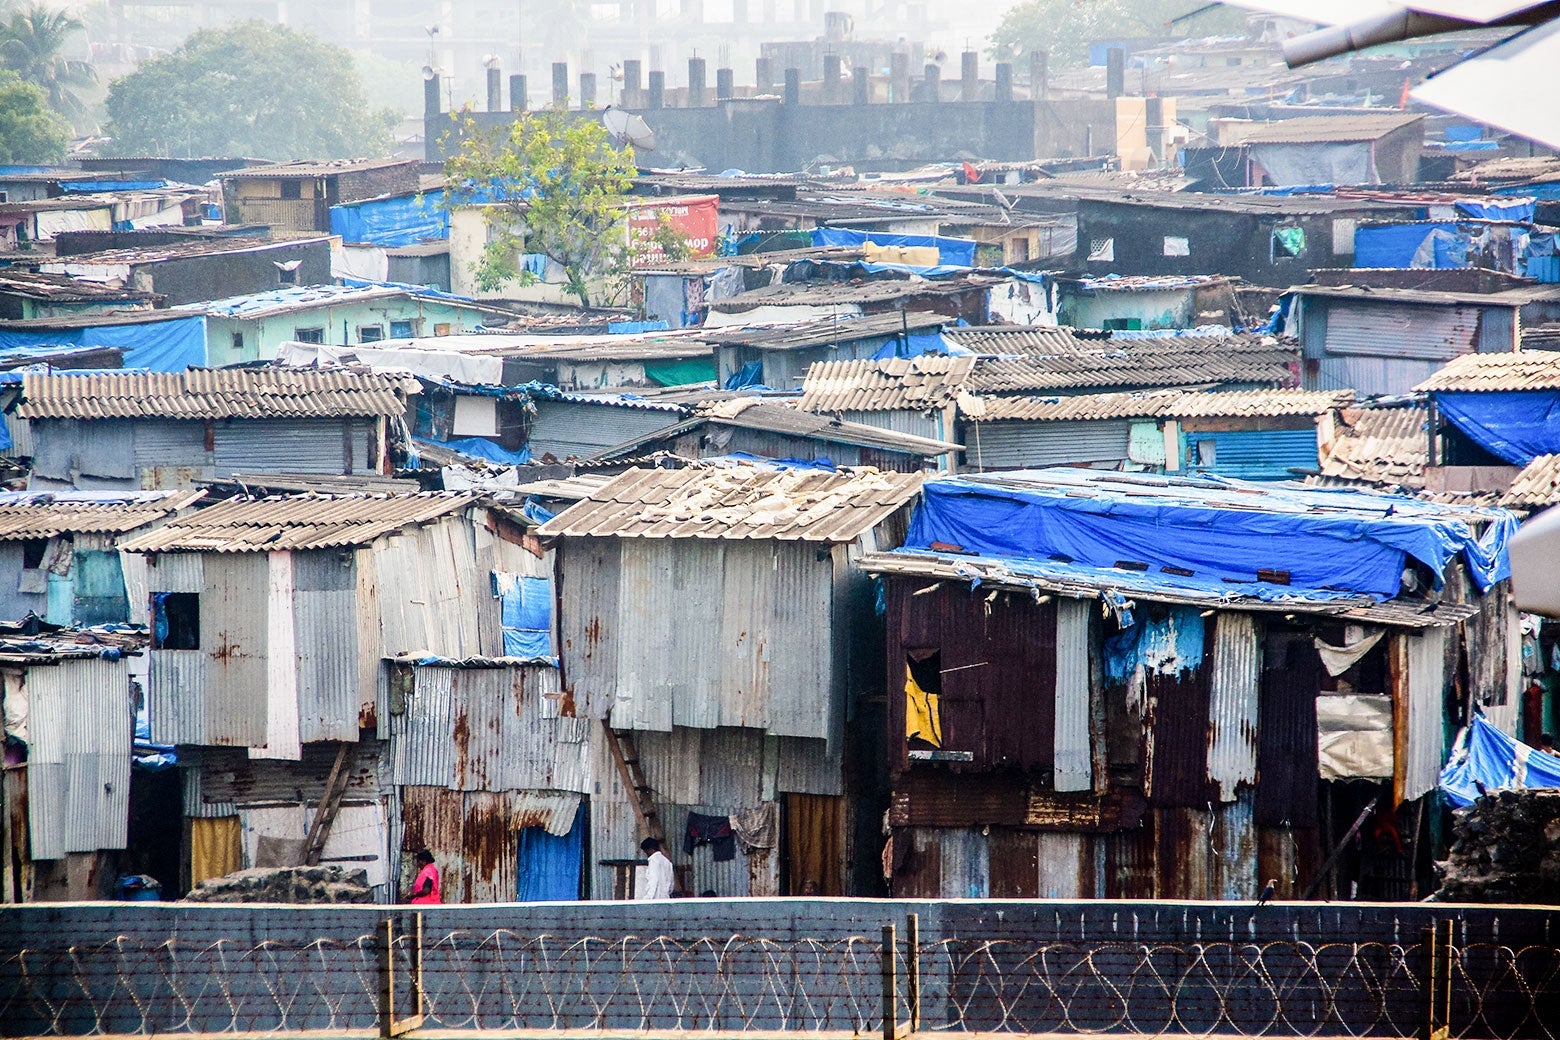 A view of huts and hanging clothes in a slum